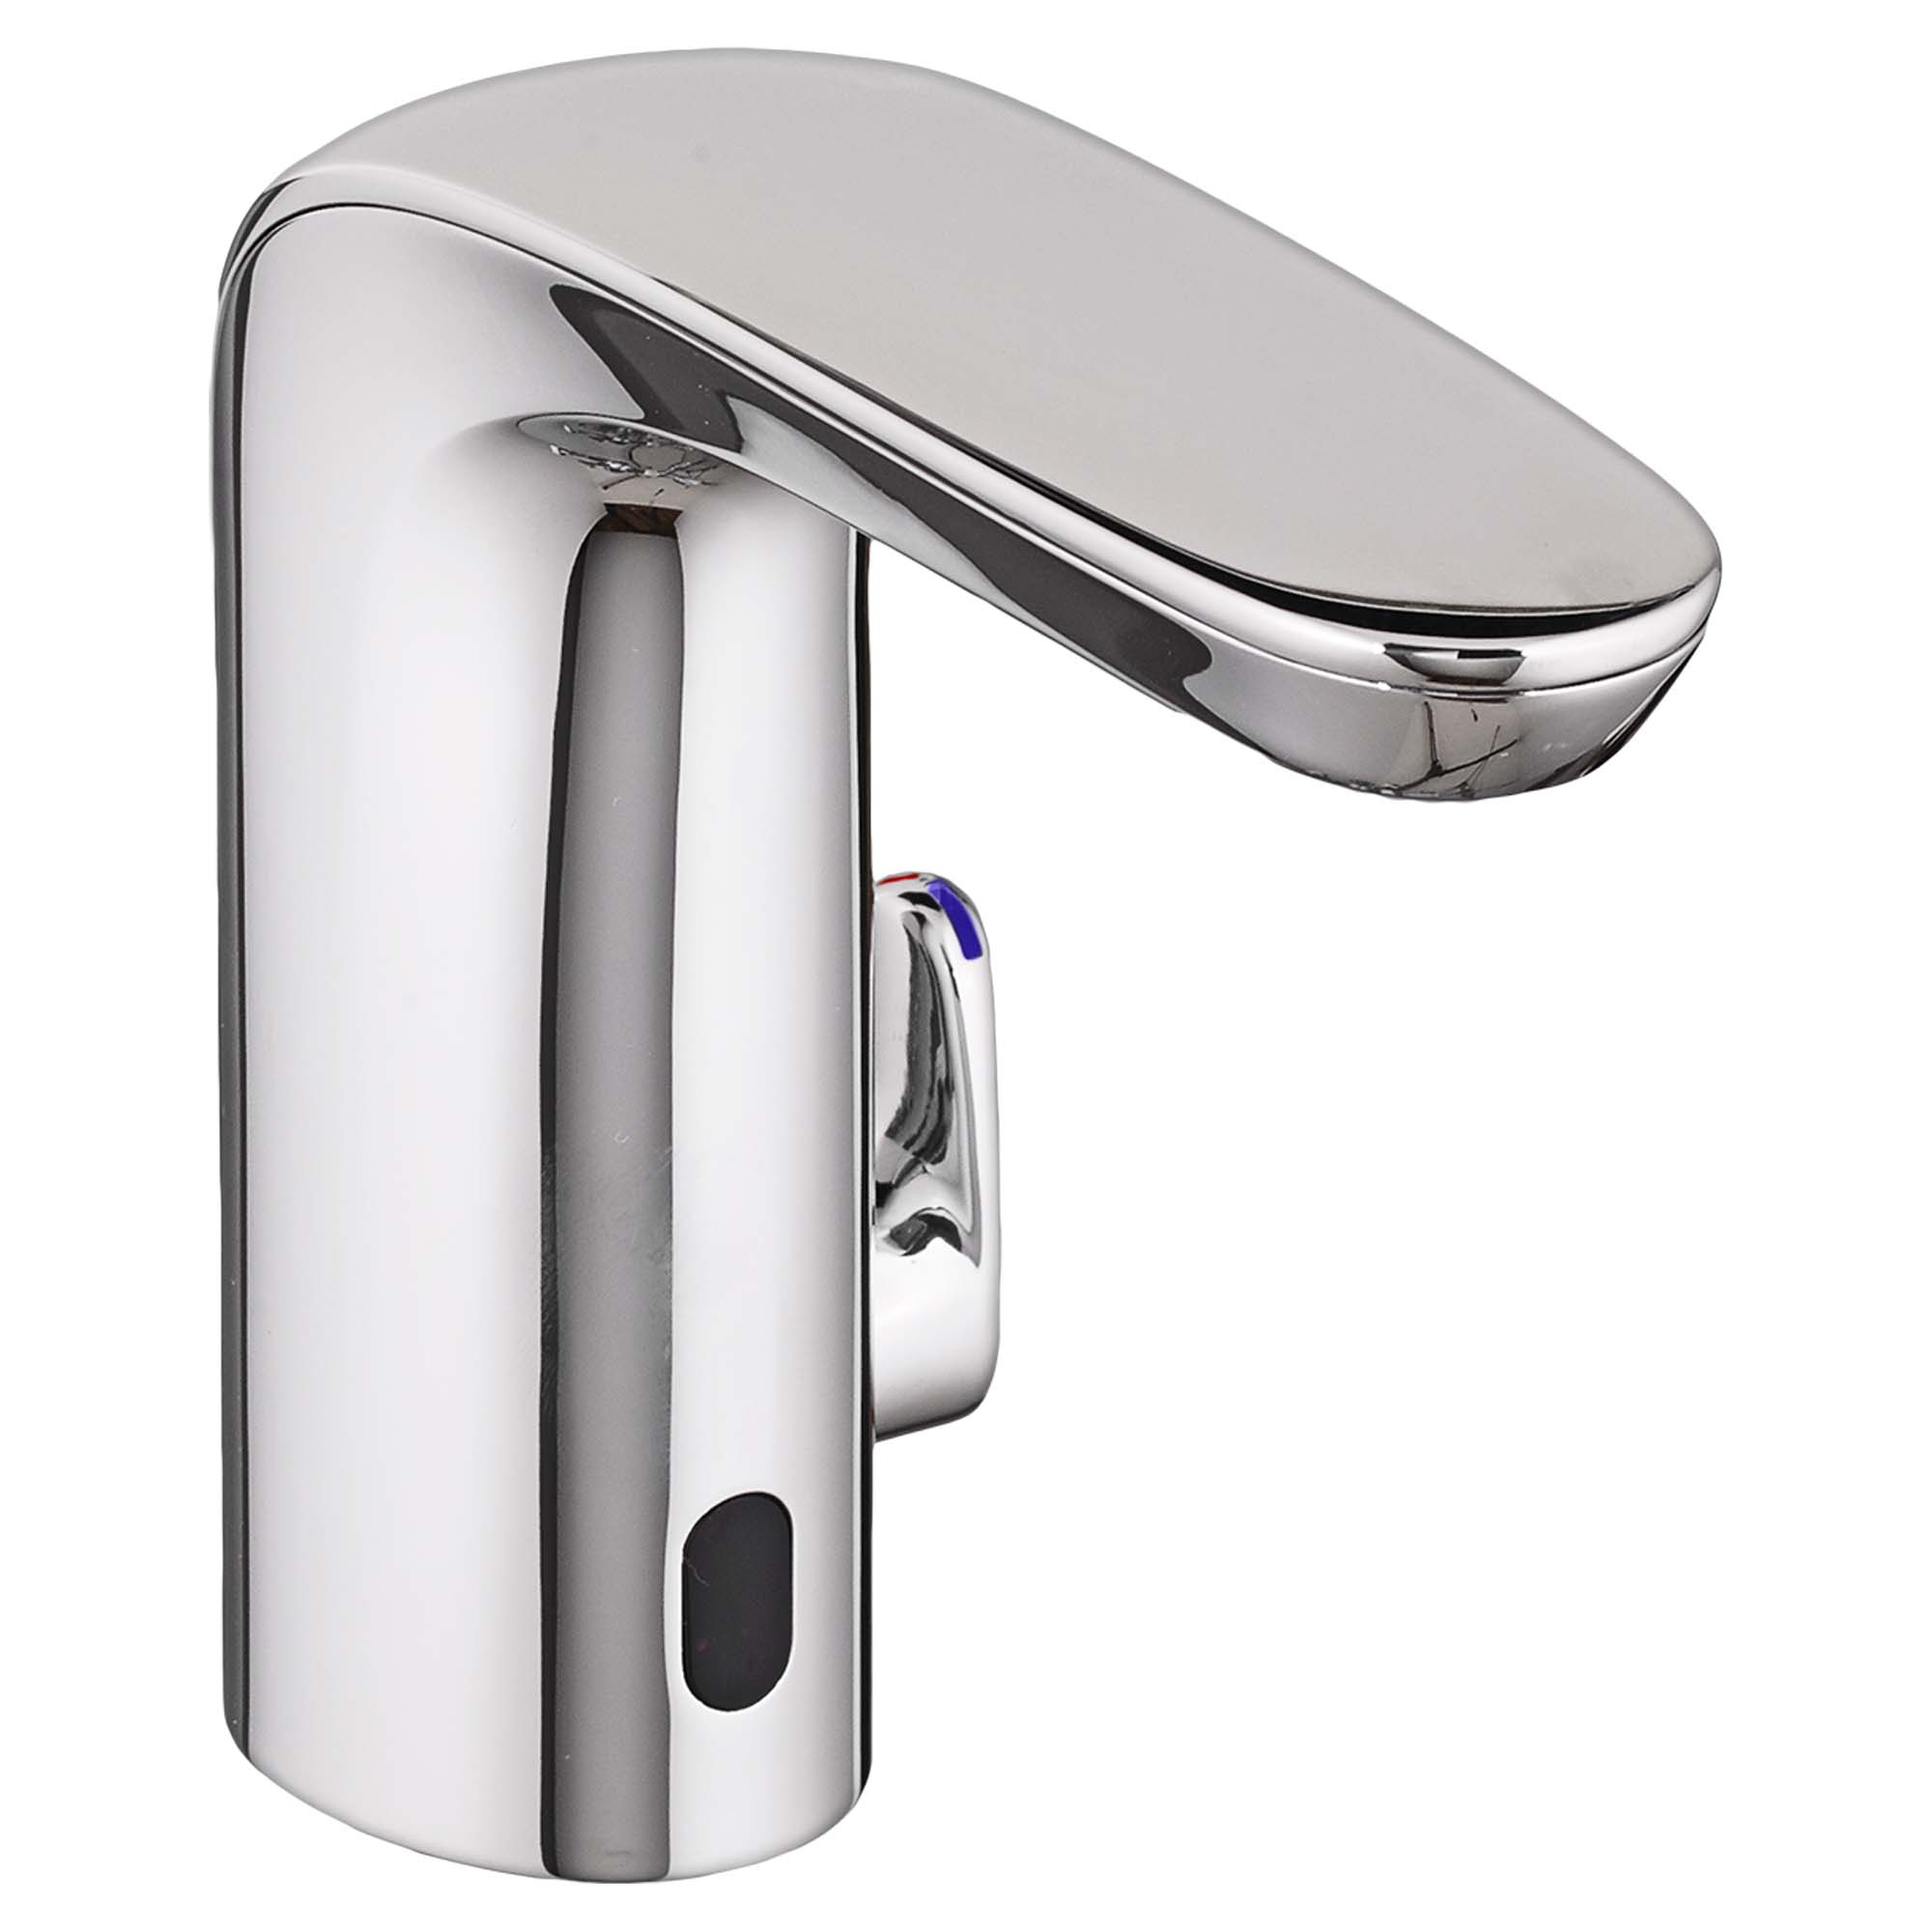 NextGen Selectronic™ Touchless Faucet, Battery-Powered With Above-Deck Mixing, 0.35 gpm/1.3 Lpm